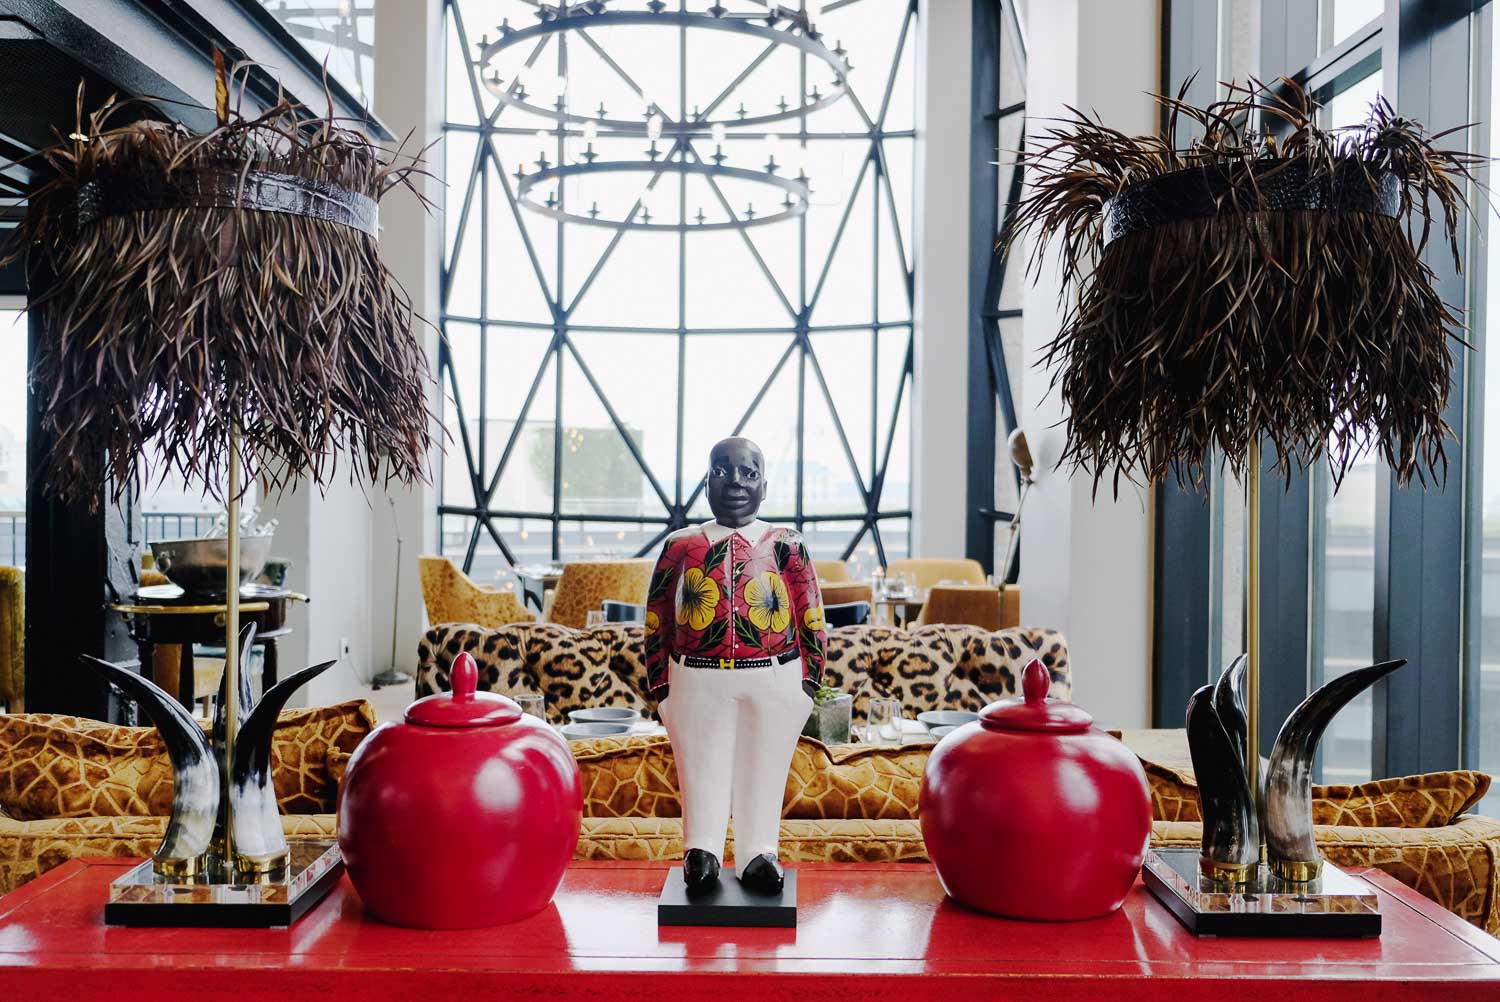 The Silo The spaces are filled with fun colorful objects and interior pieces representing the African continent and it's diverse rich cultures. A sheer joy to be surrounded by